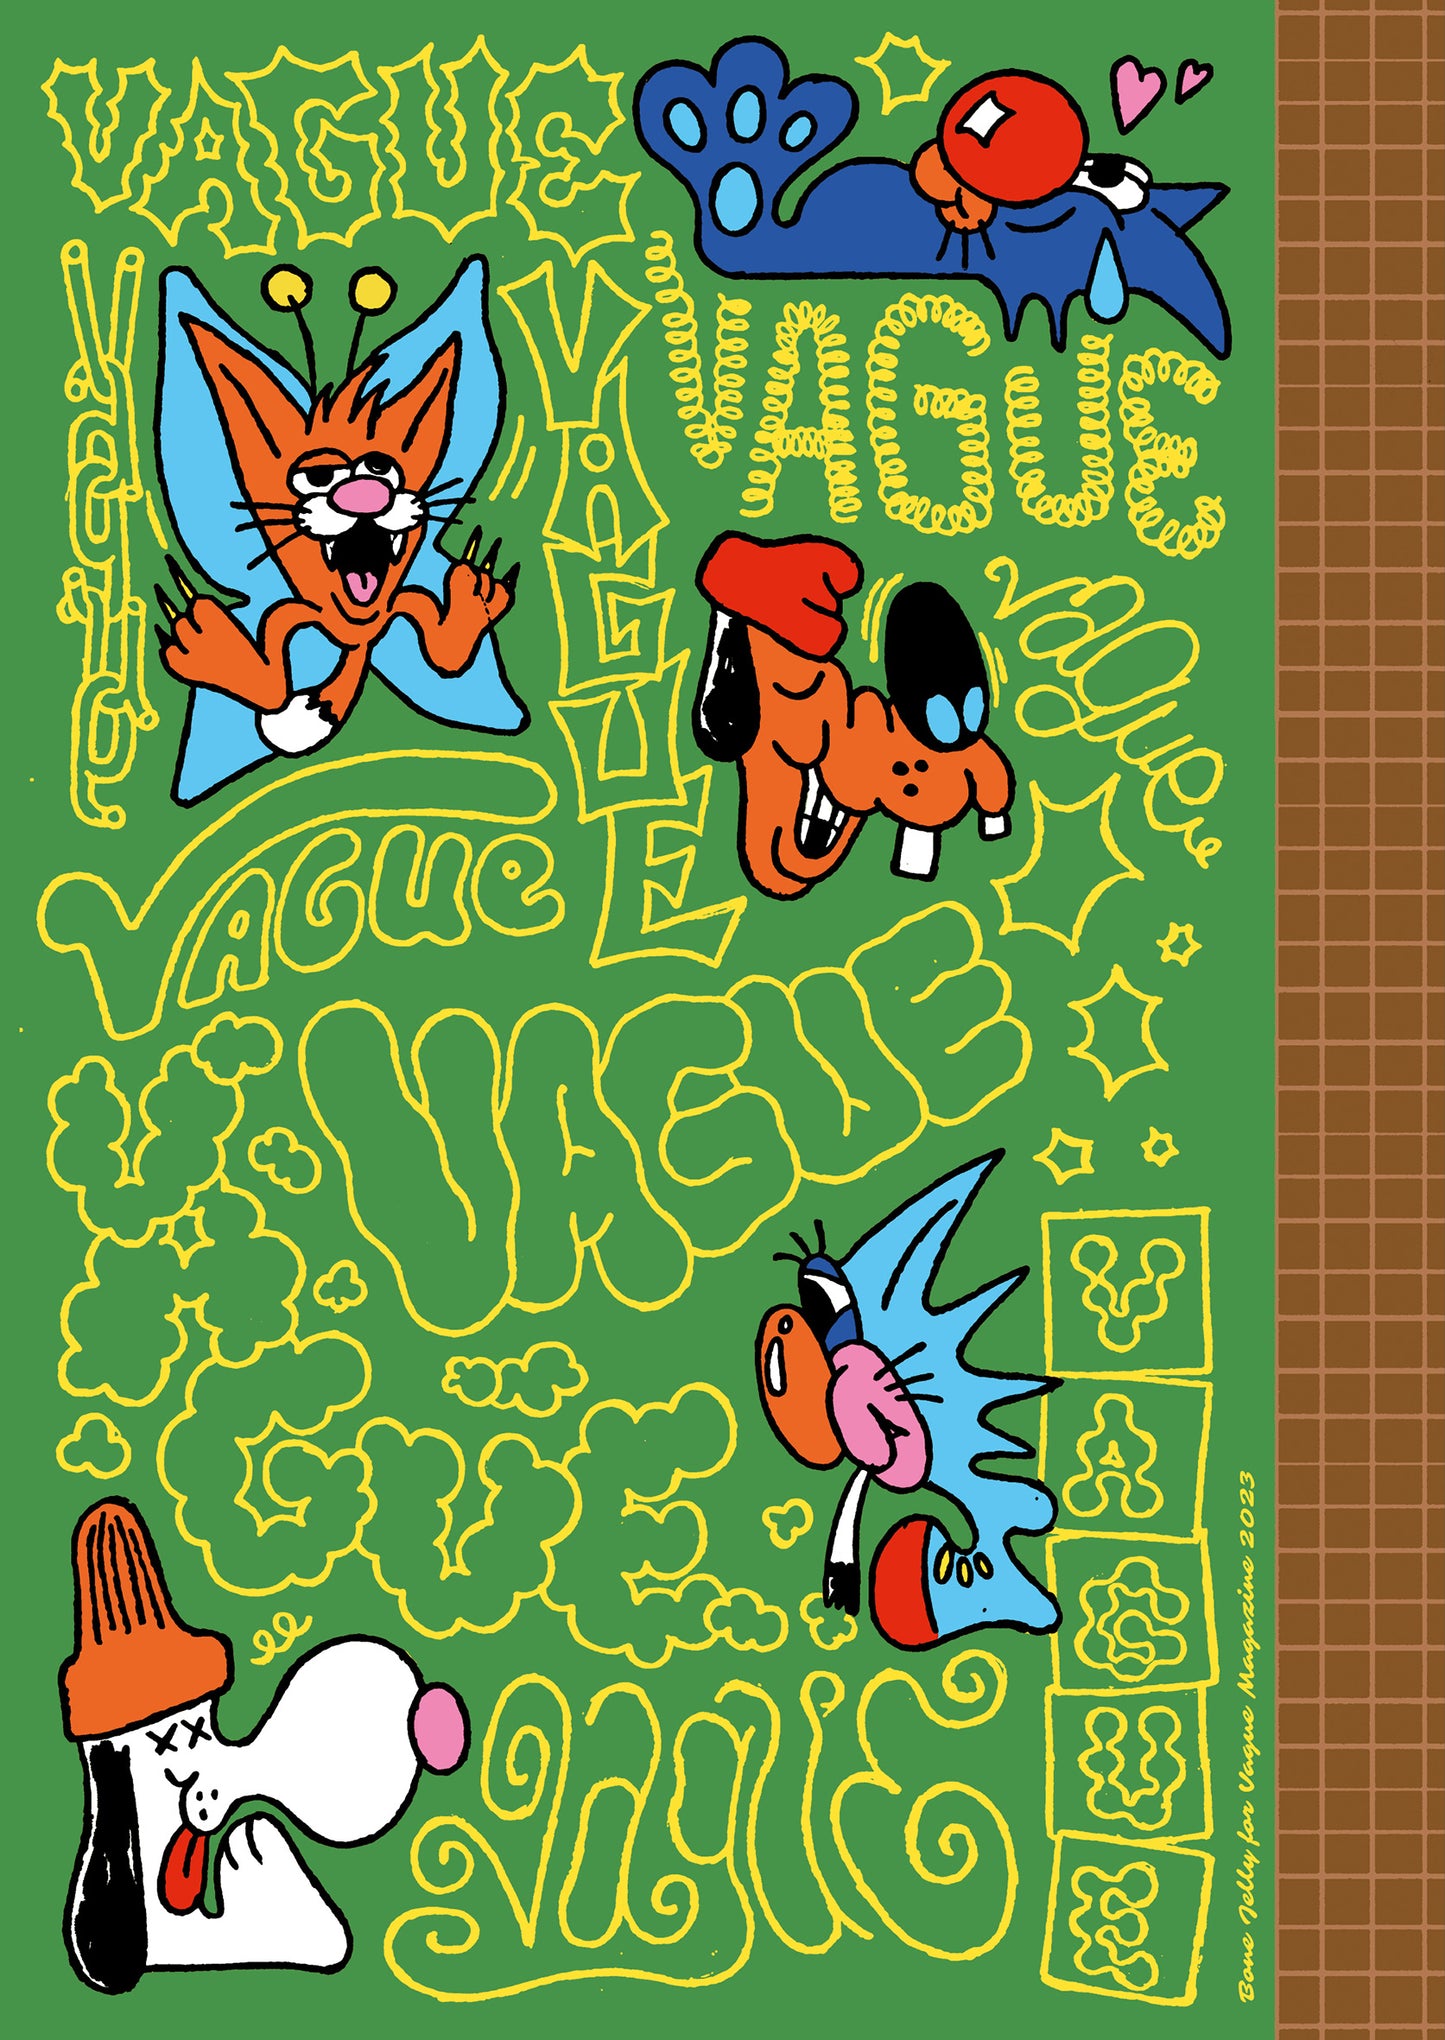 Vague Issue 36